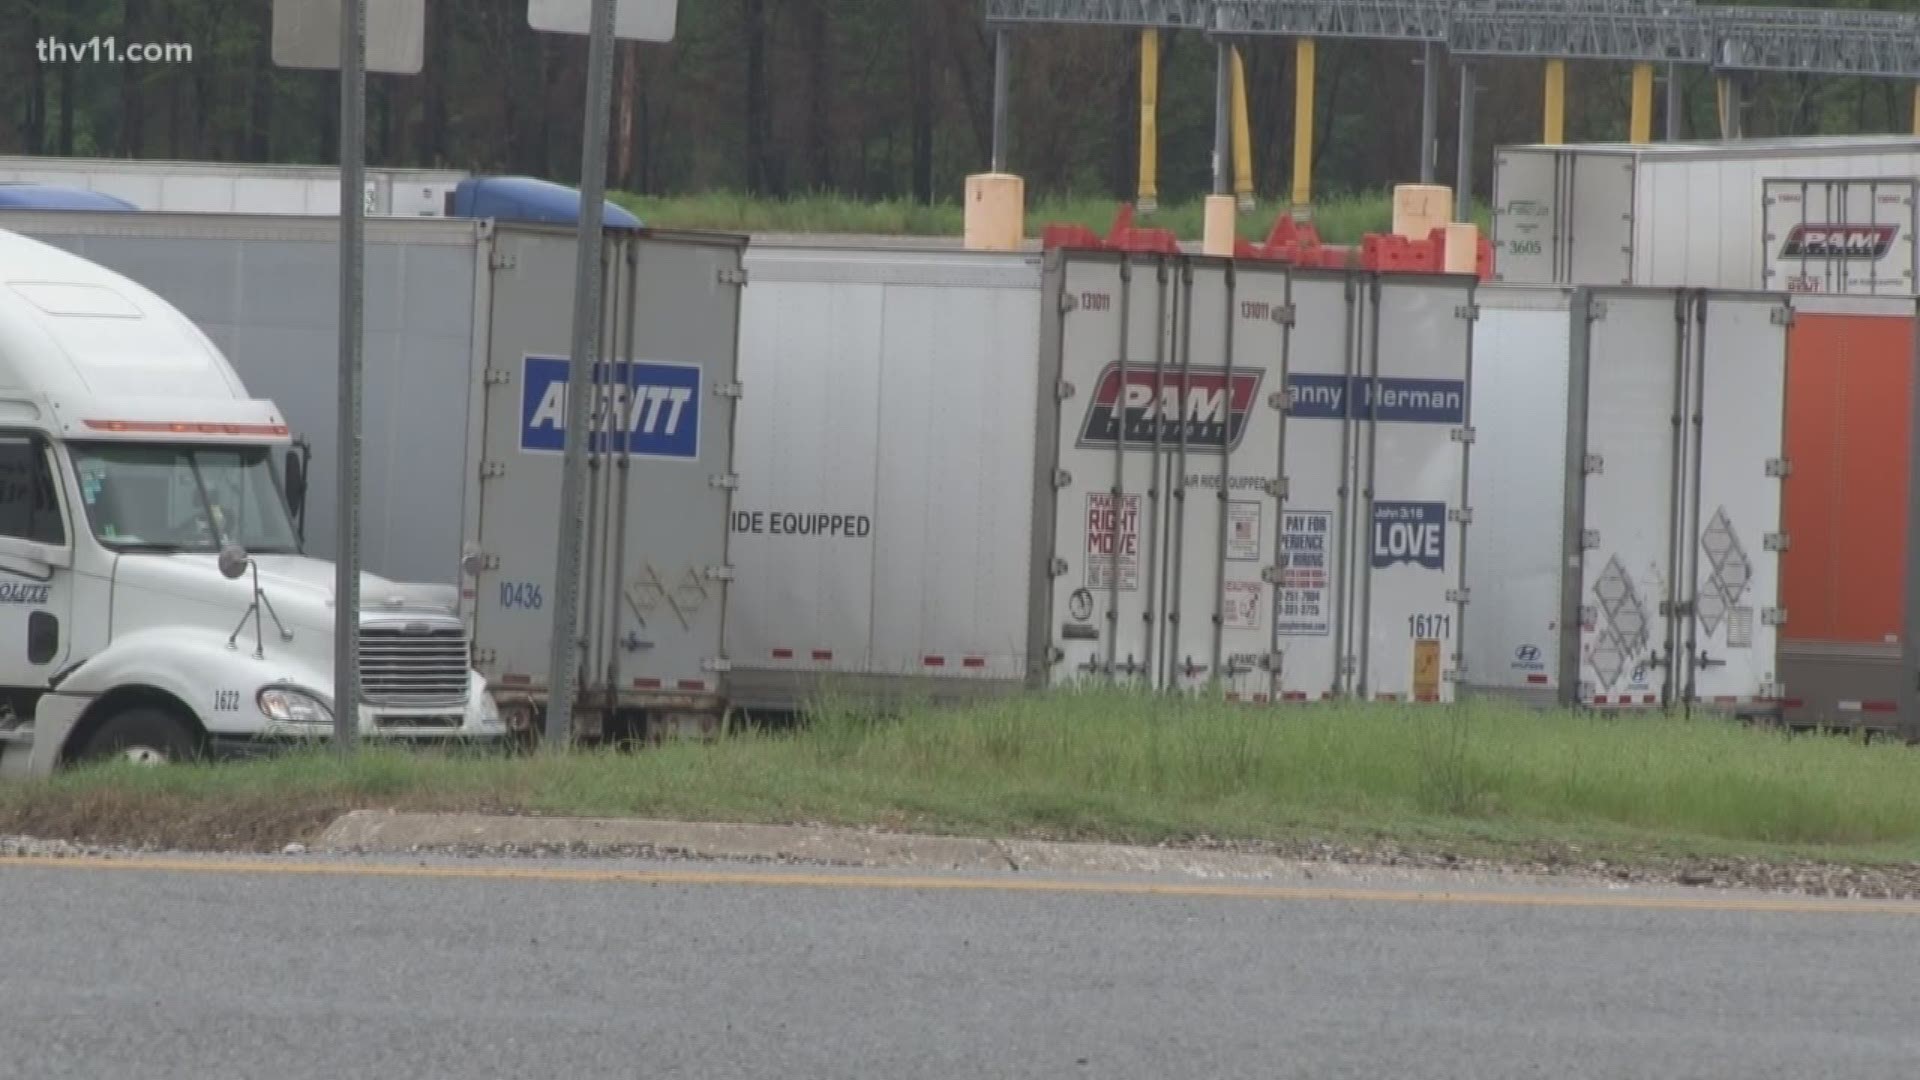 If you spend any time on the Arkansas interstates, you know how big the trucking industry is here. Members of that industry are helping their fellow drivers.